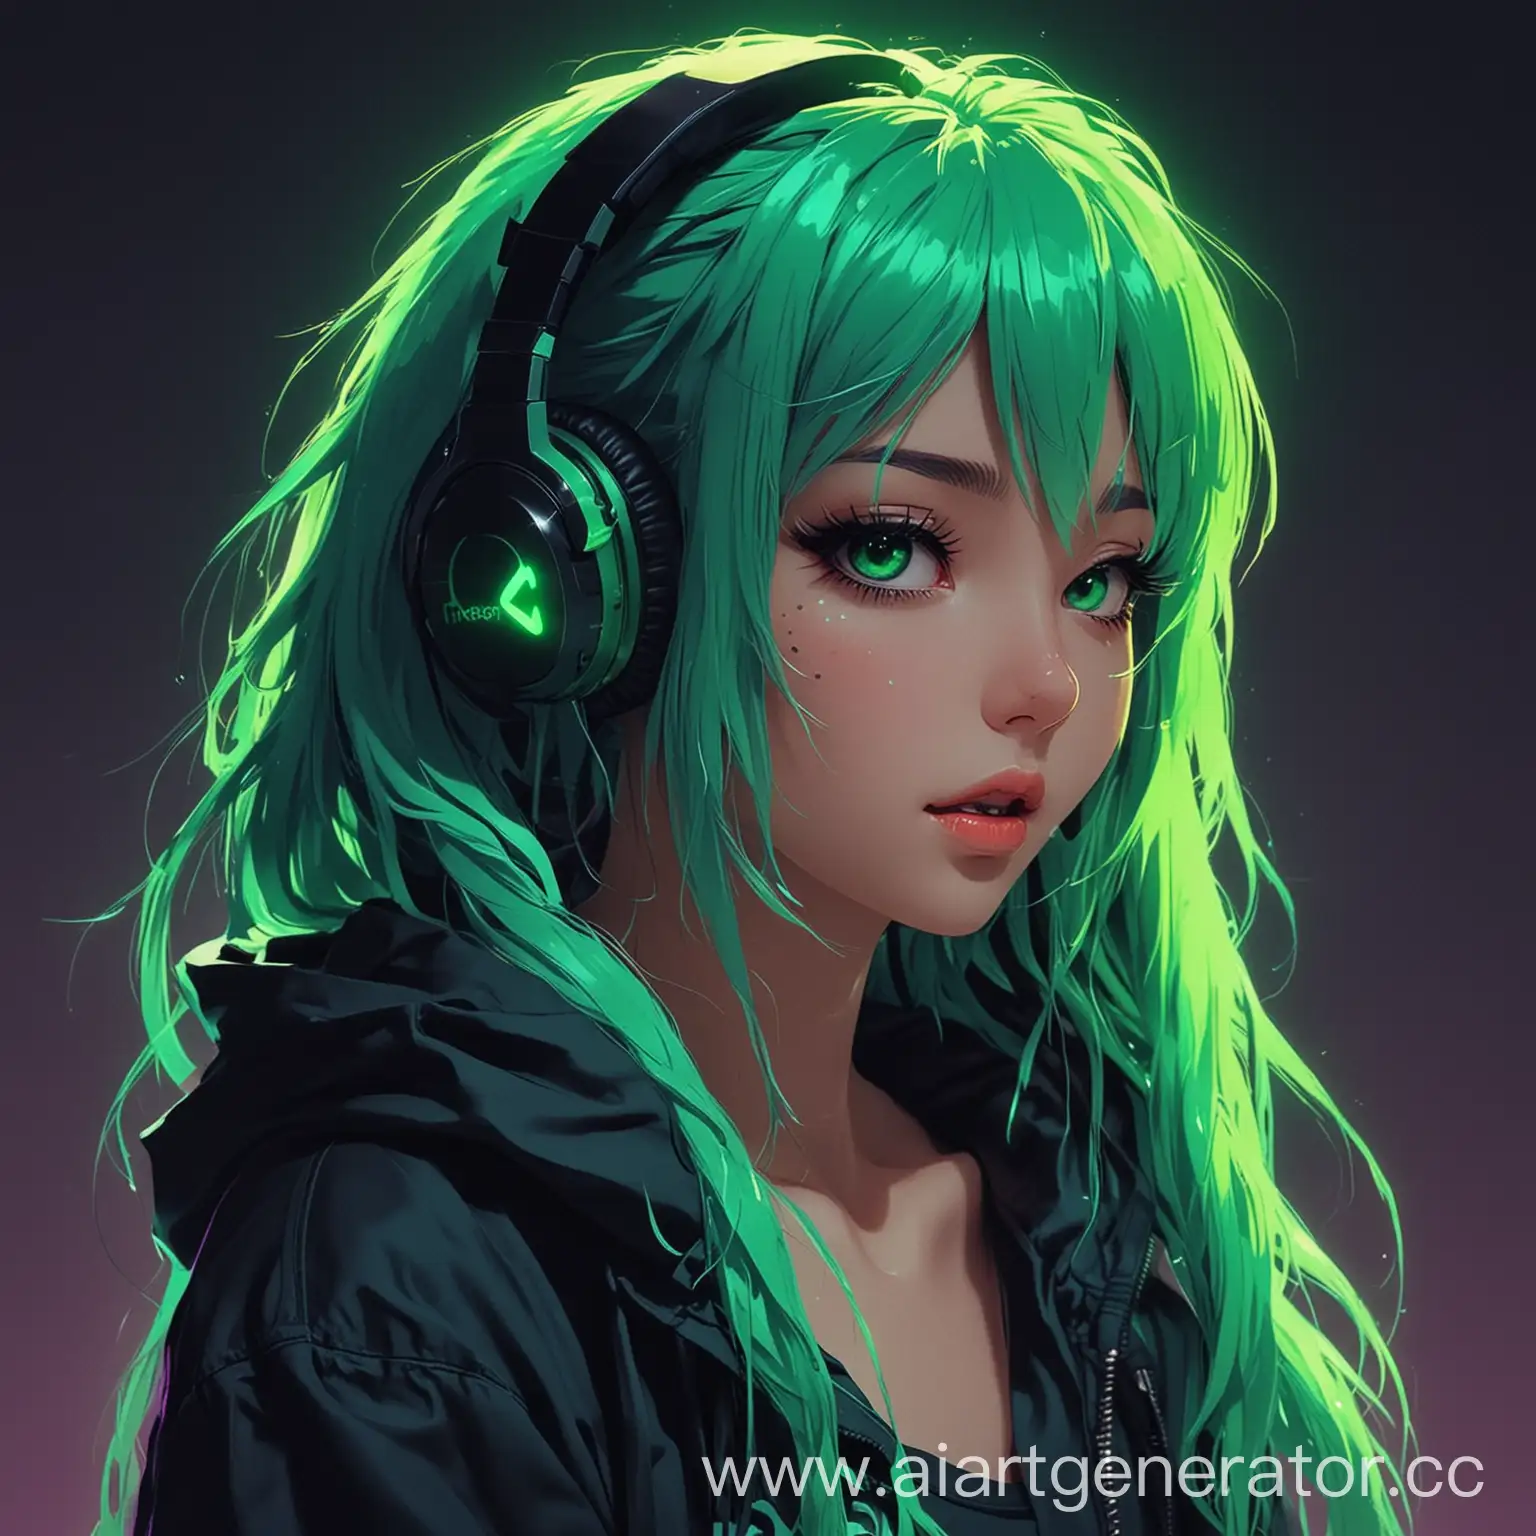 Neon-Style-Anime-Girl-Listening-to-Music-in-Green-Toxic-Environment